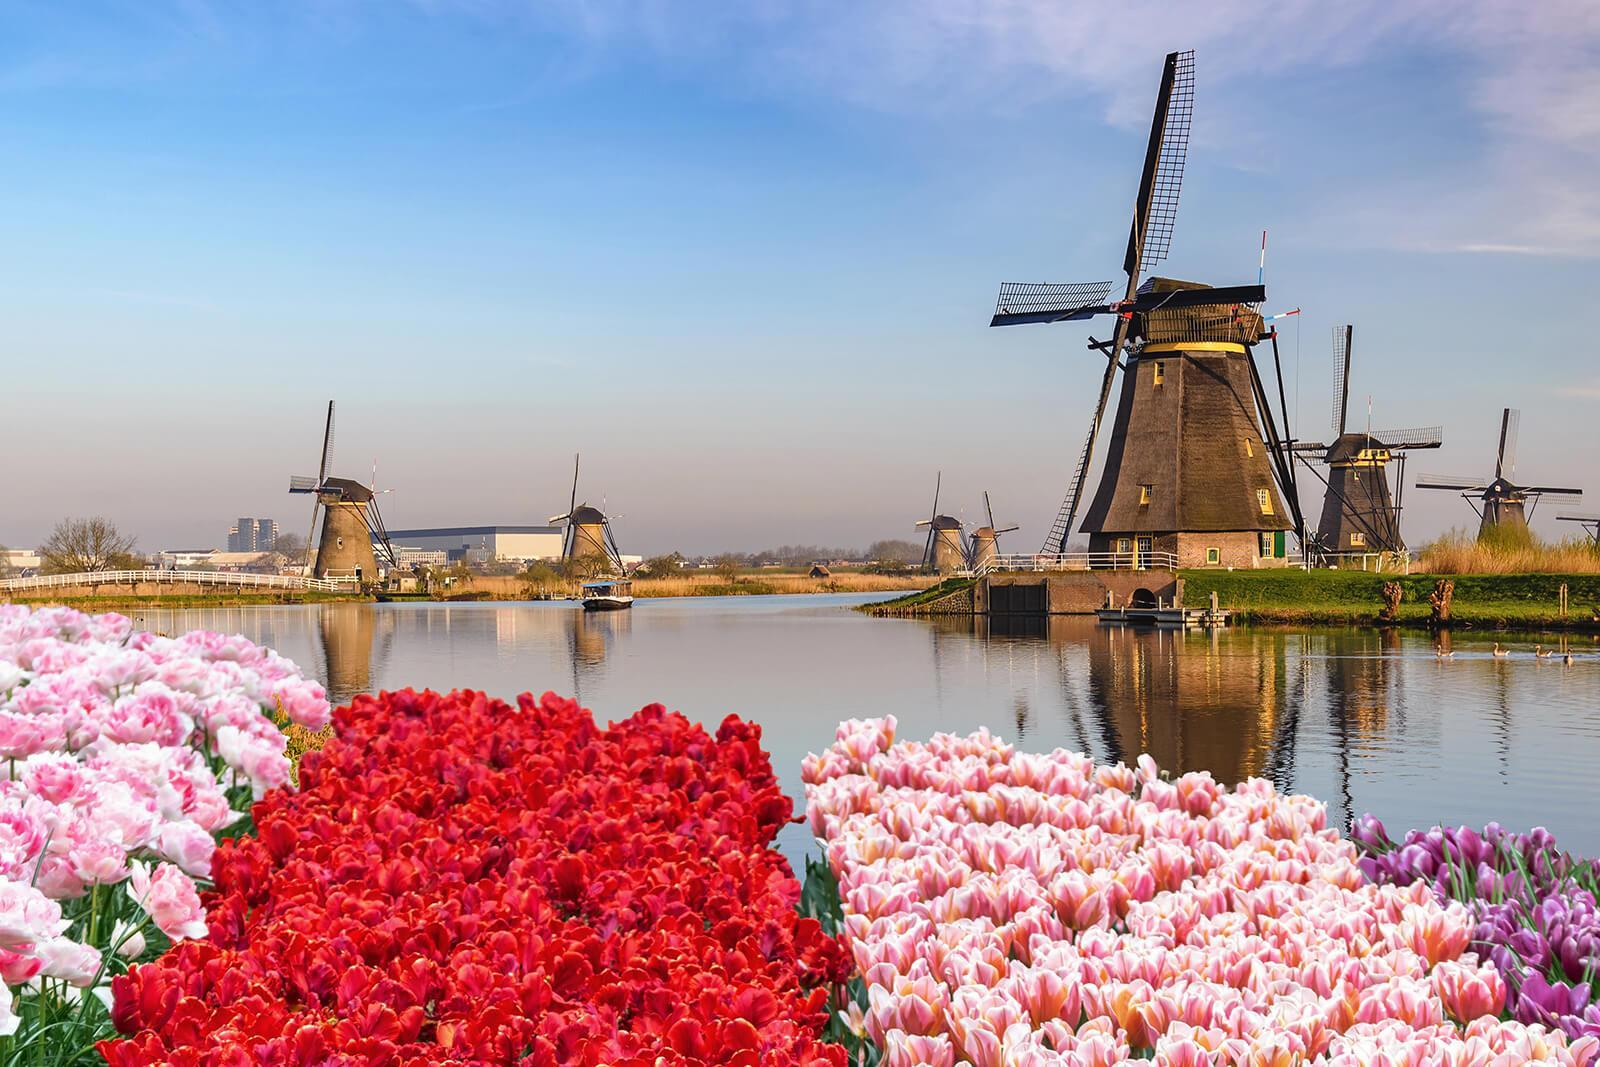 Flooding in the Netherlands drowns multiple tulip bulb crops